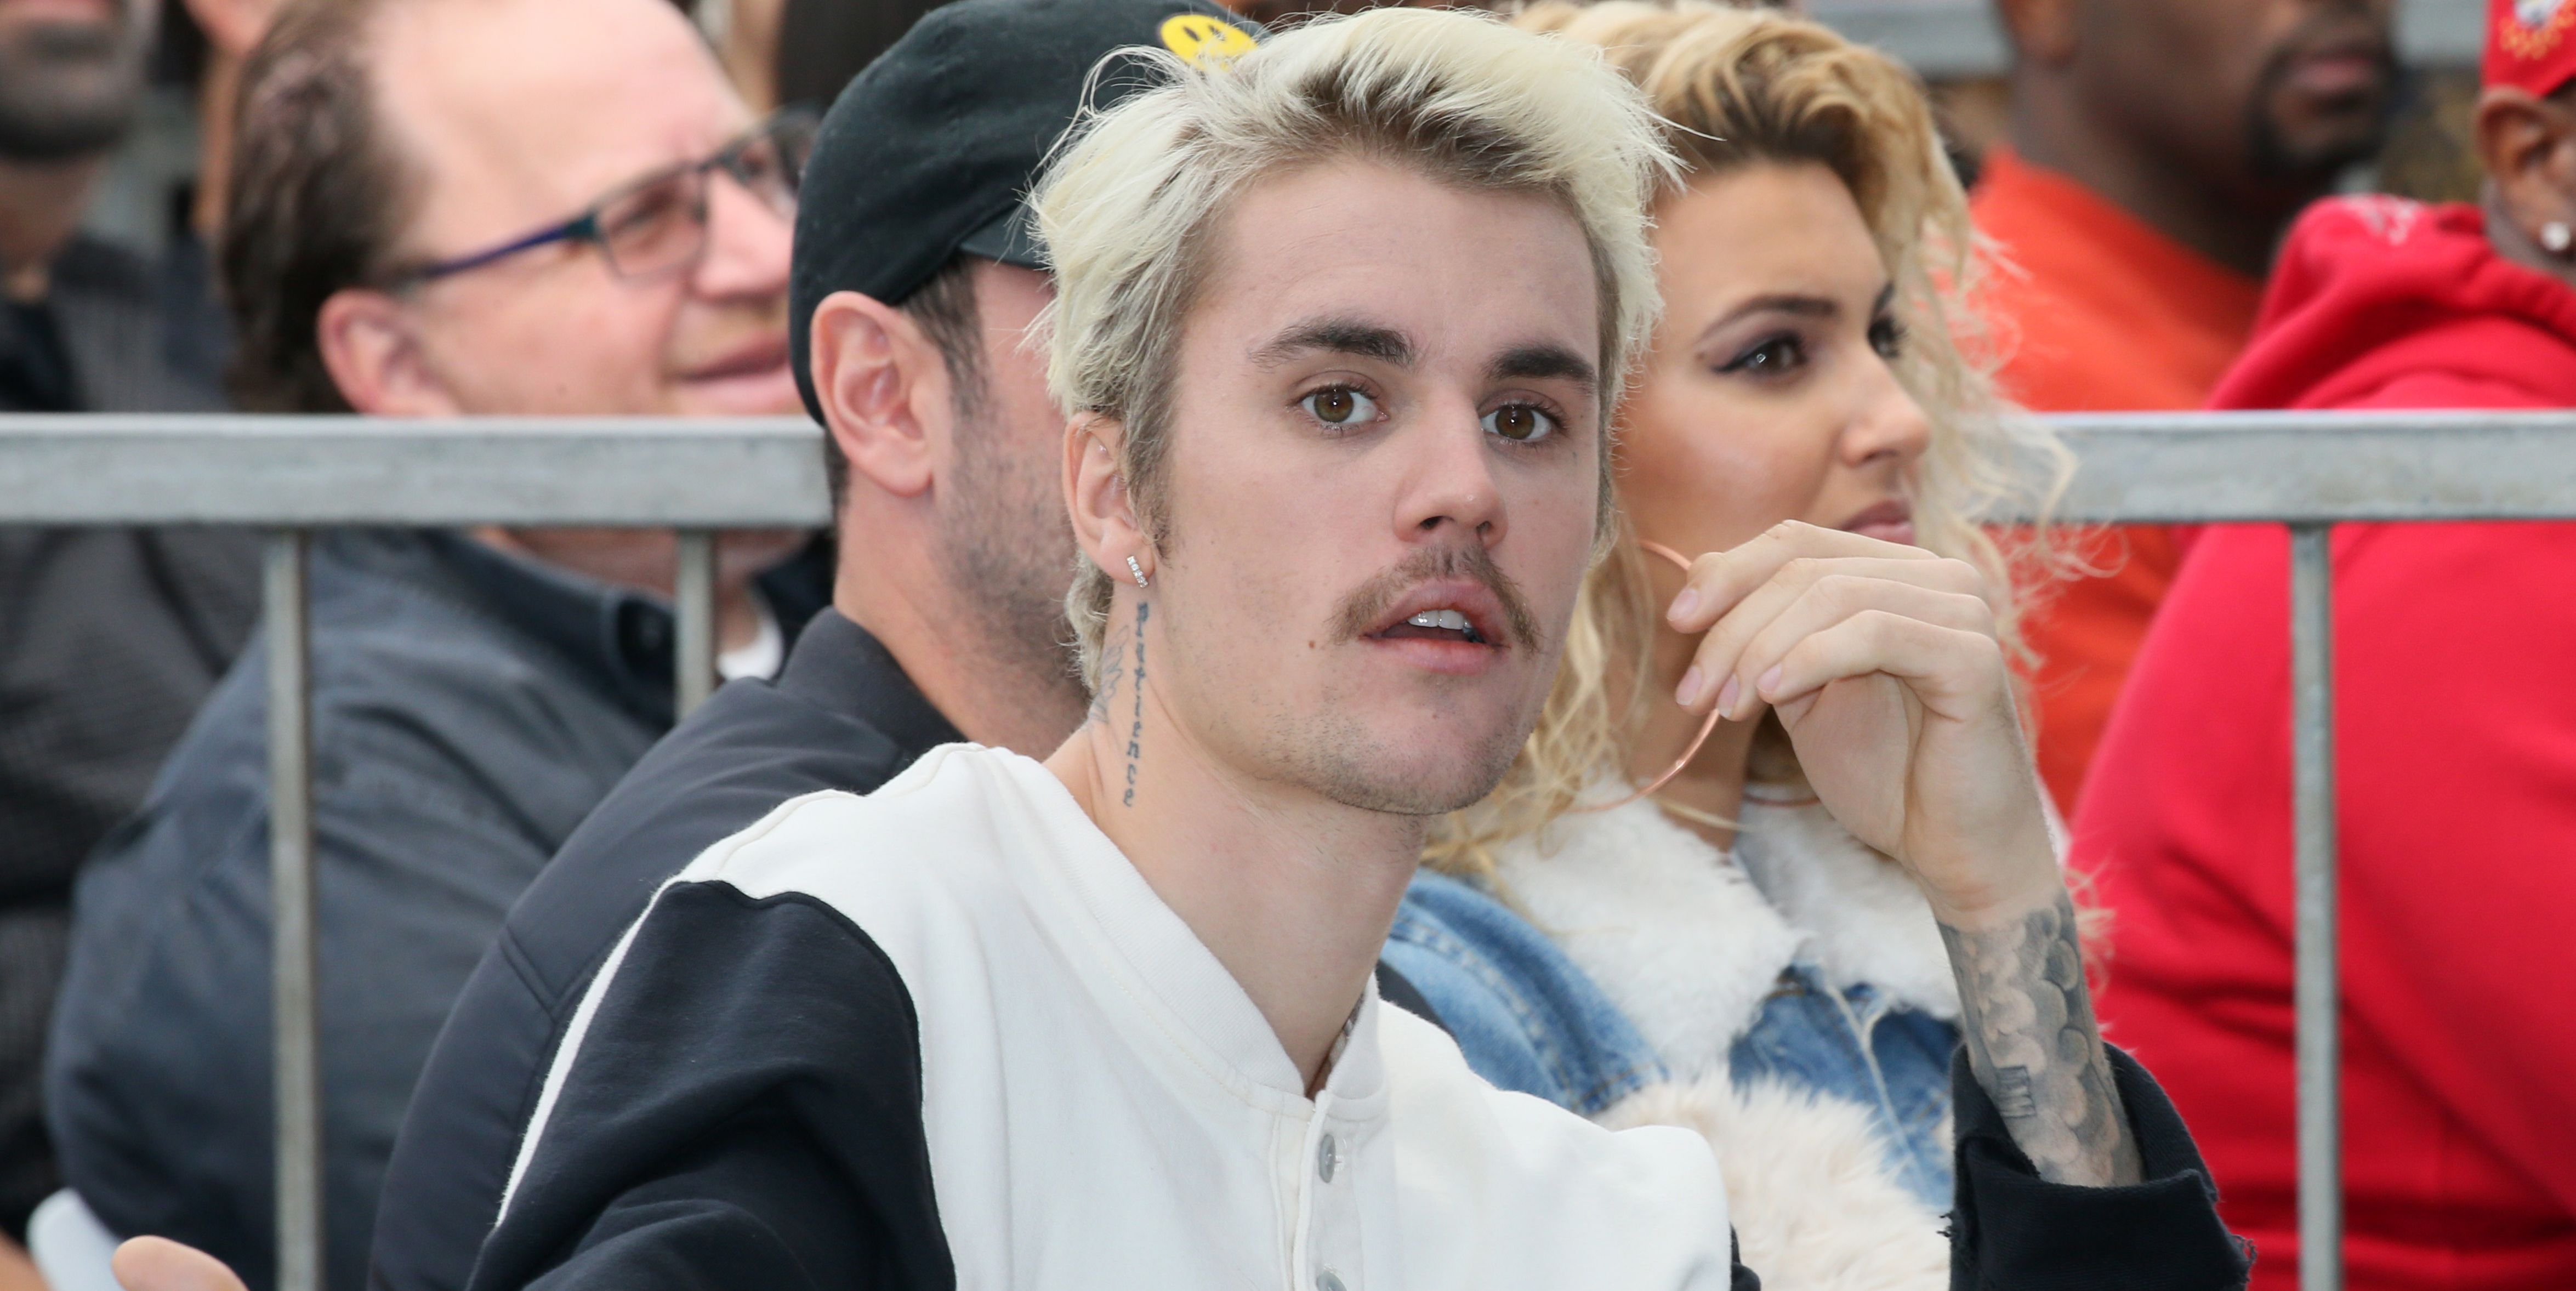 Justin Bieber has reportedly filed a $20M defamation suit against the two women who accused him of sexual assault.